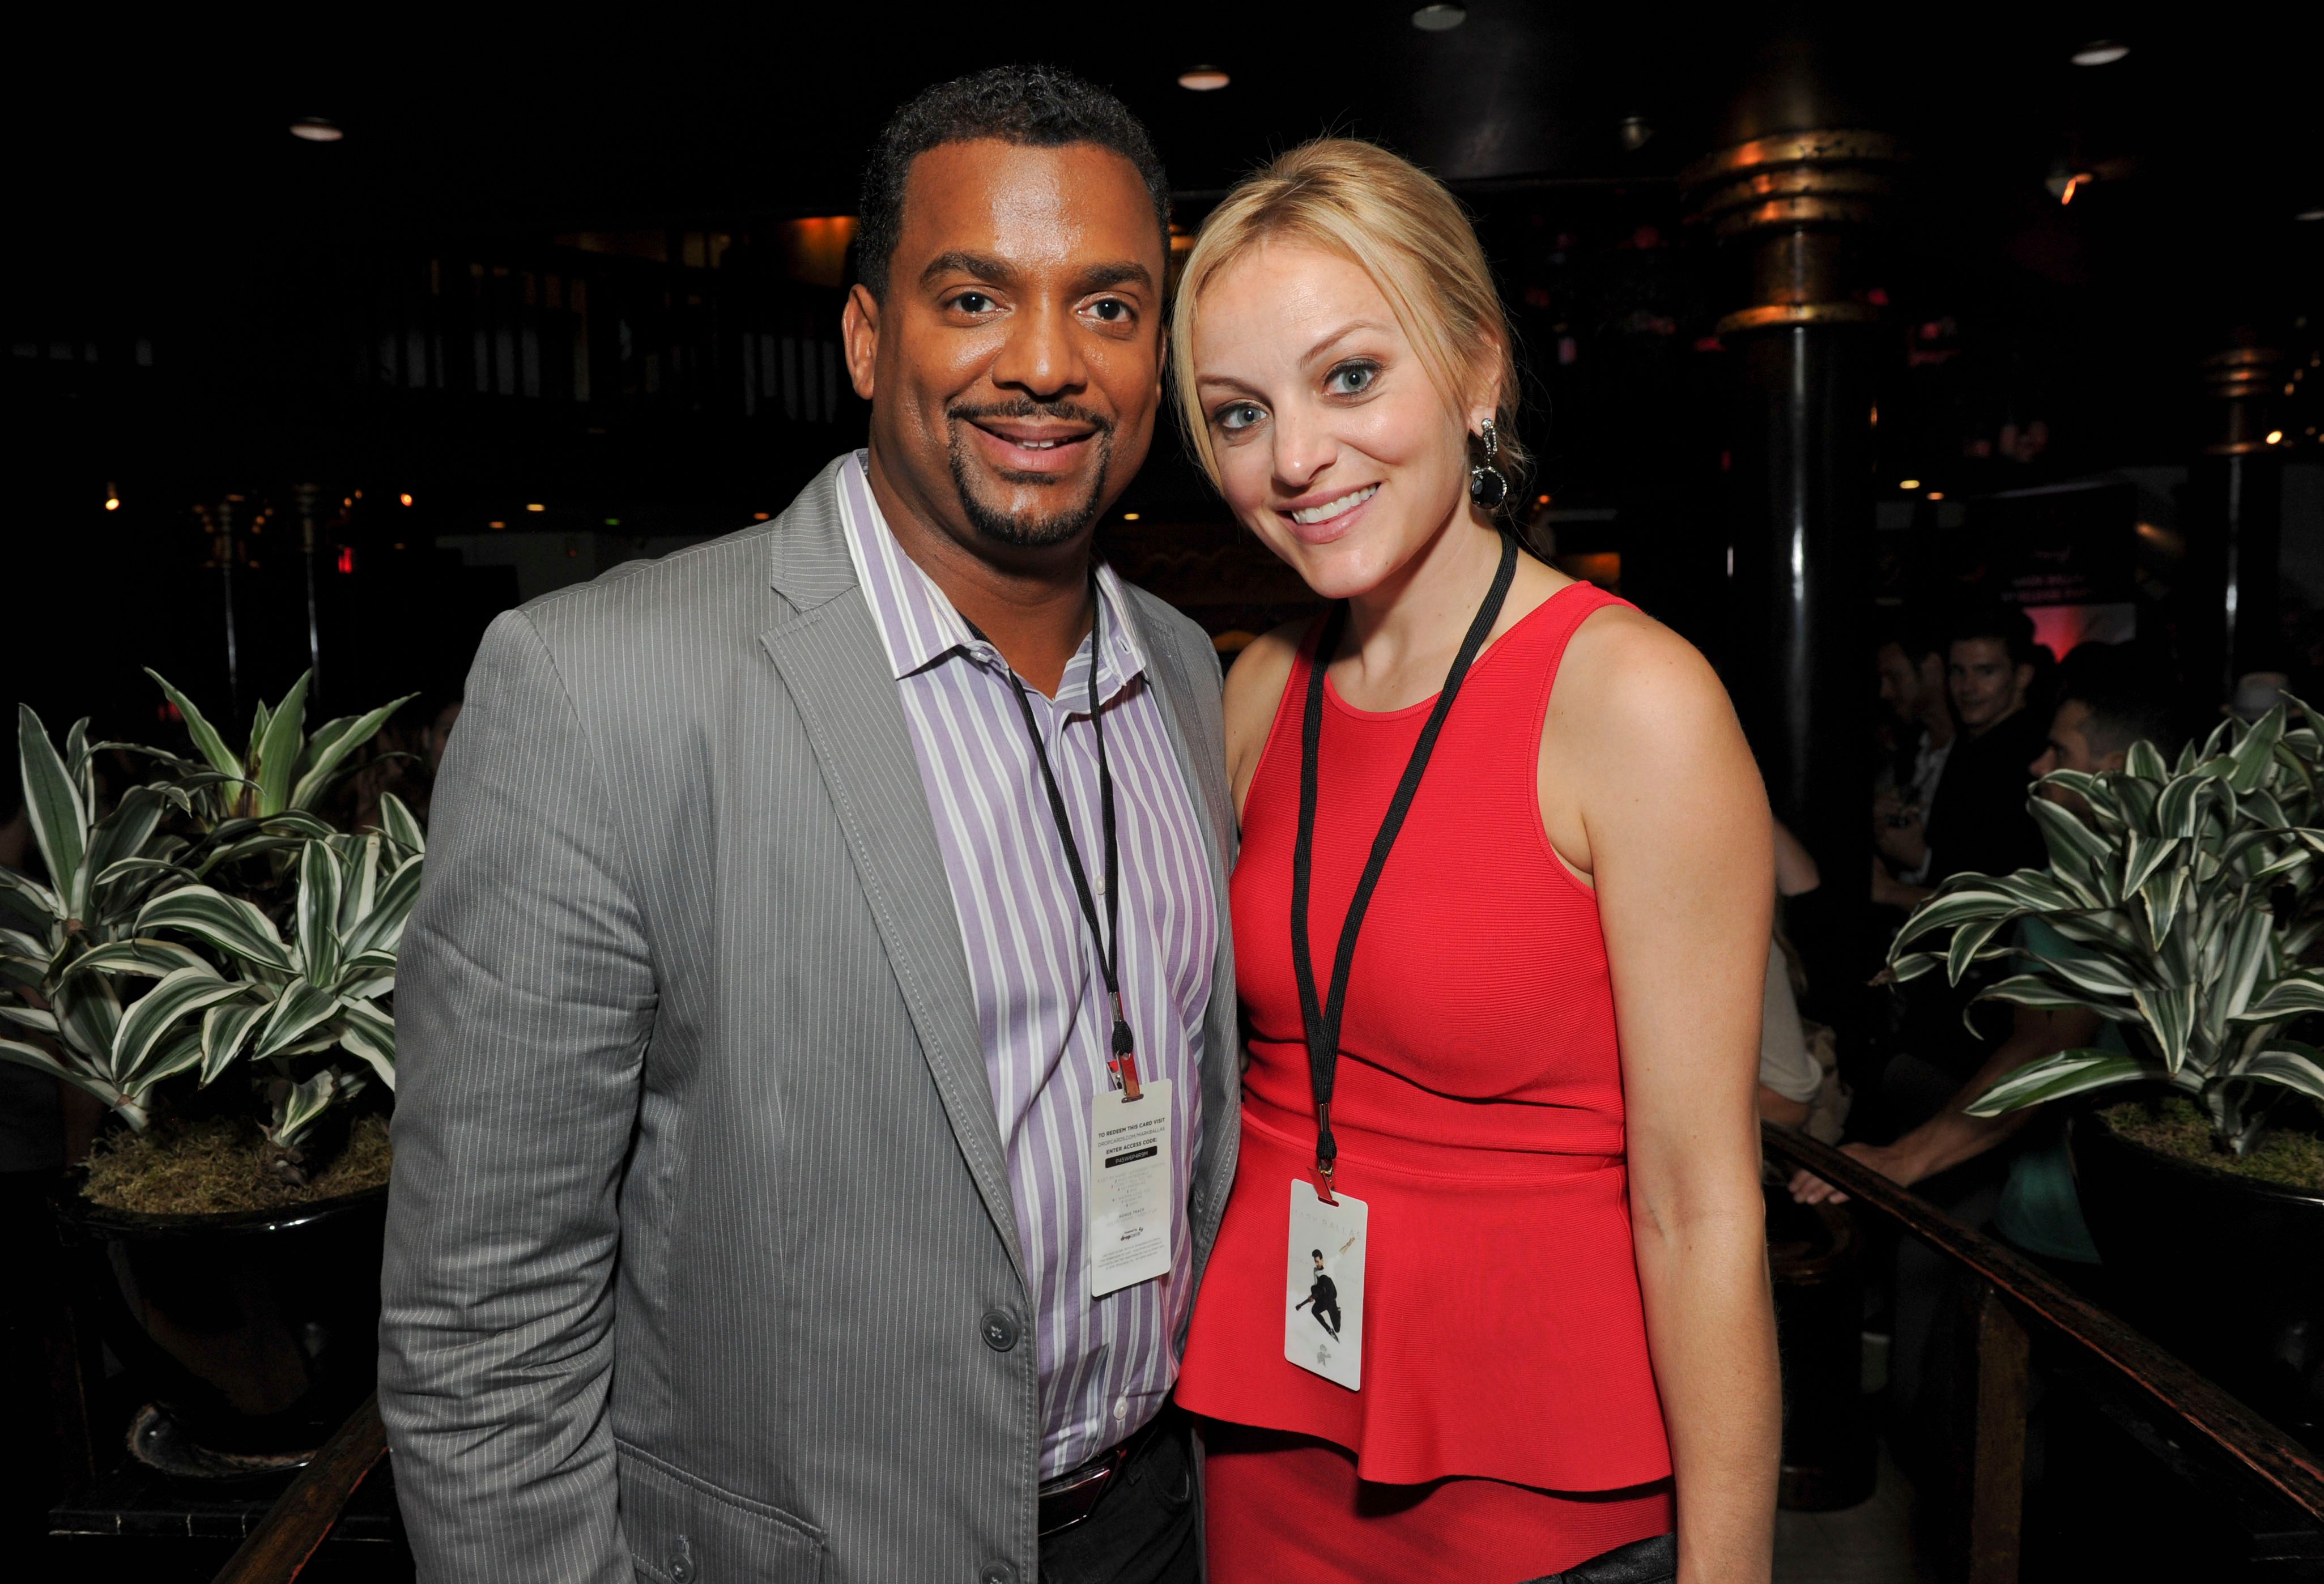 Alfonso Ribeiro and Angela Unkrich Ribeiro during Mark Ballas Debuts EP "Kicking Clouds" event at Crustacean on September 16, 2014 in Beverly Hills, California. | Source: Getty Images